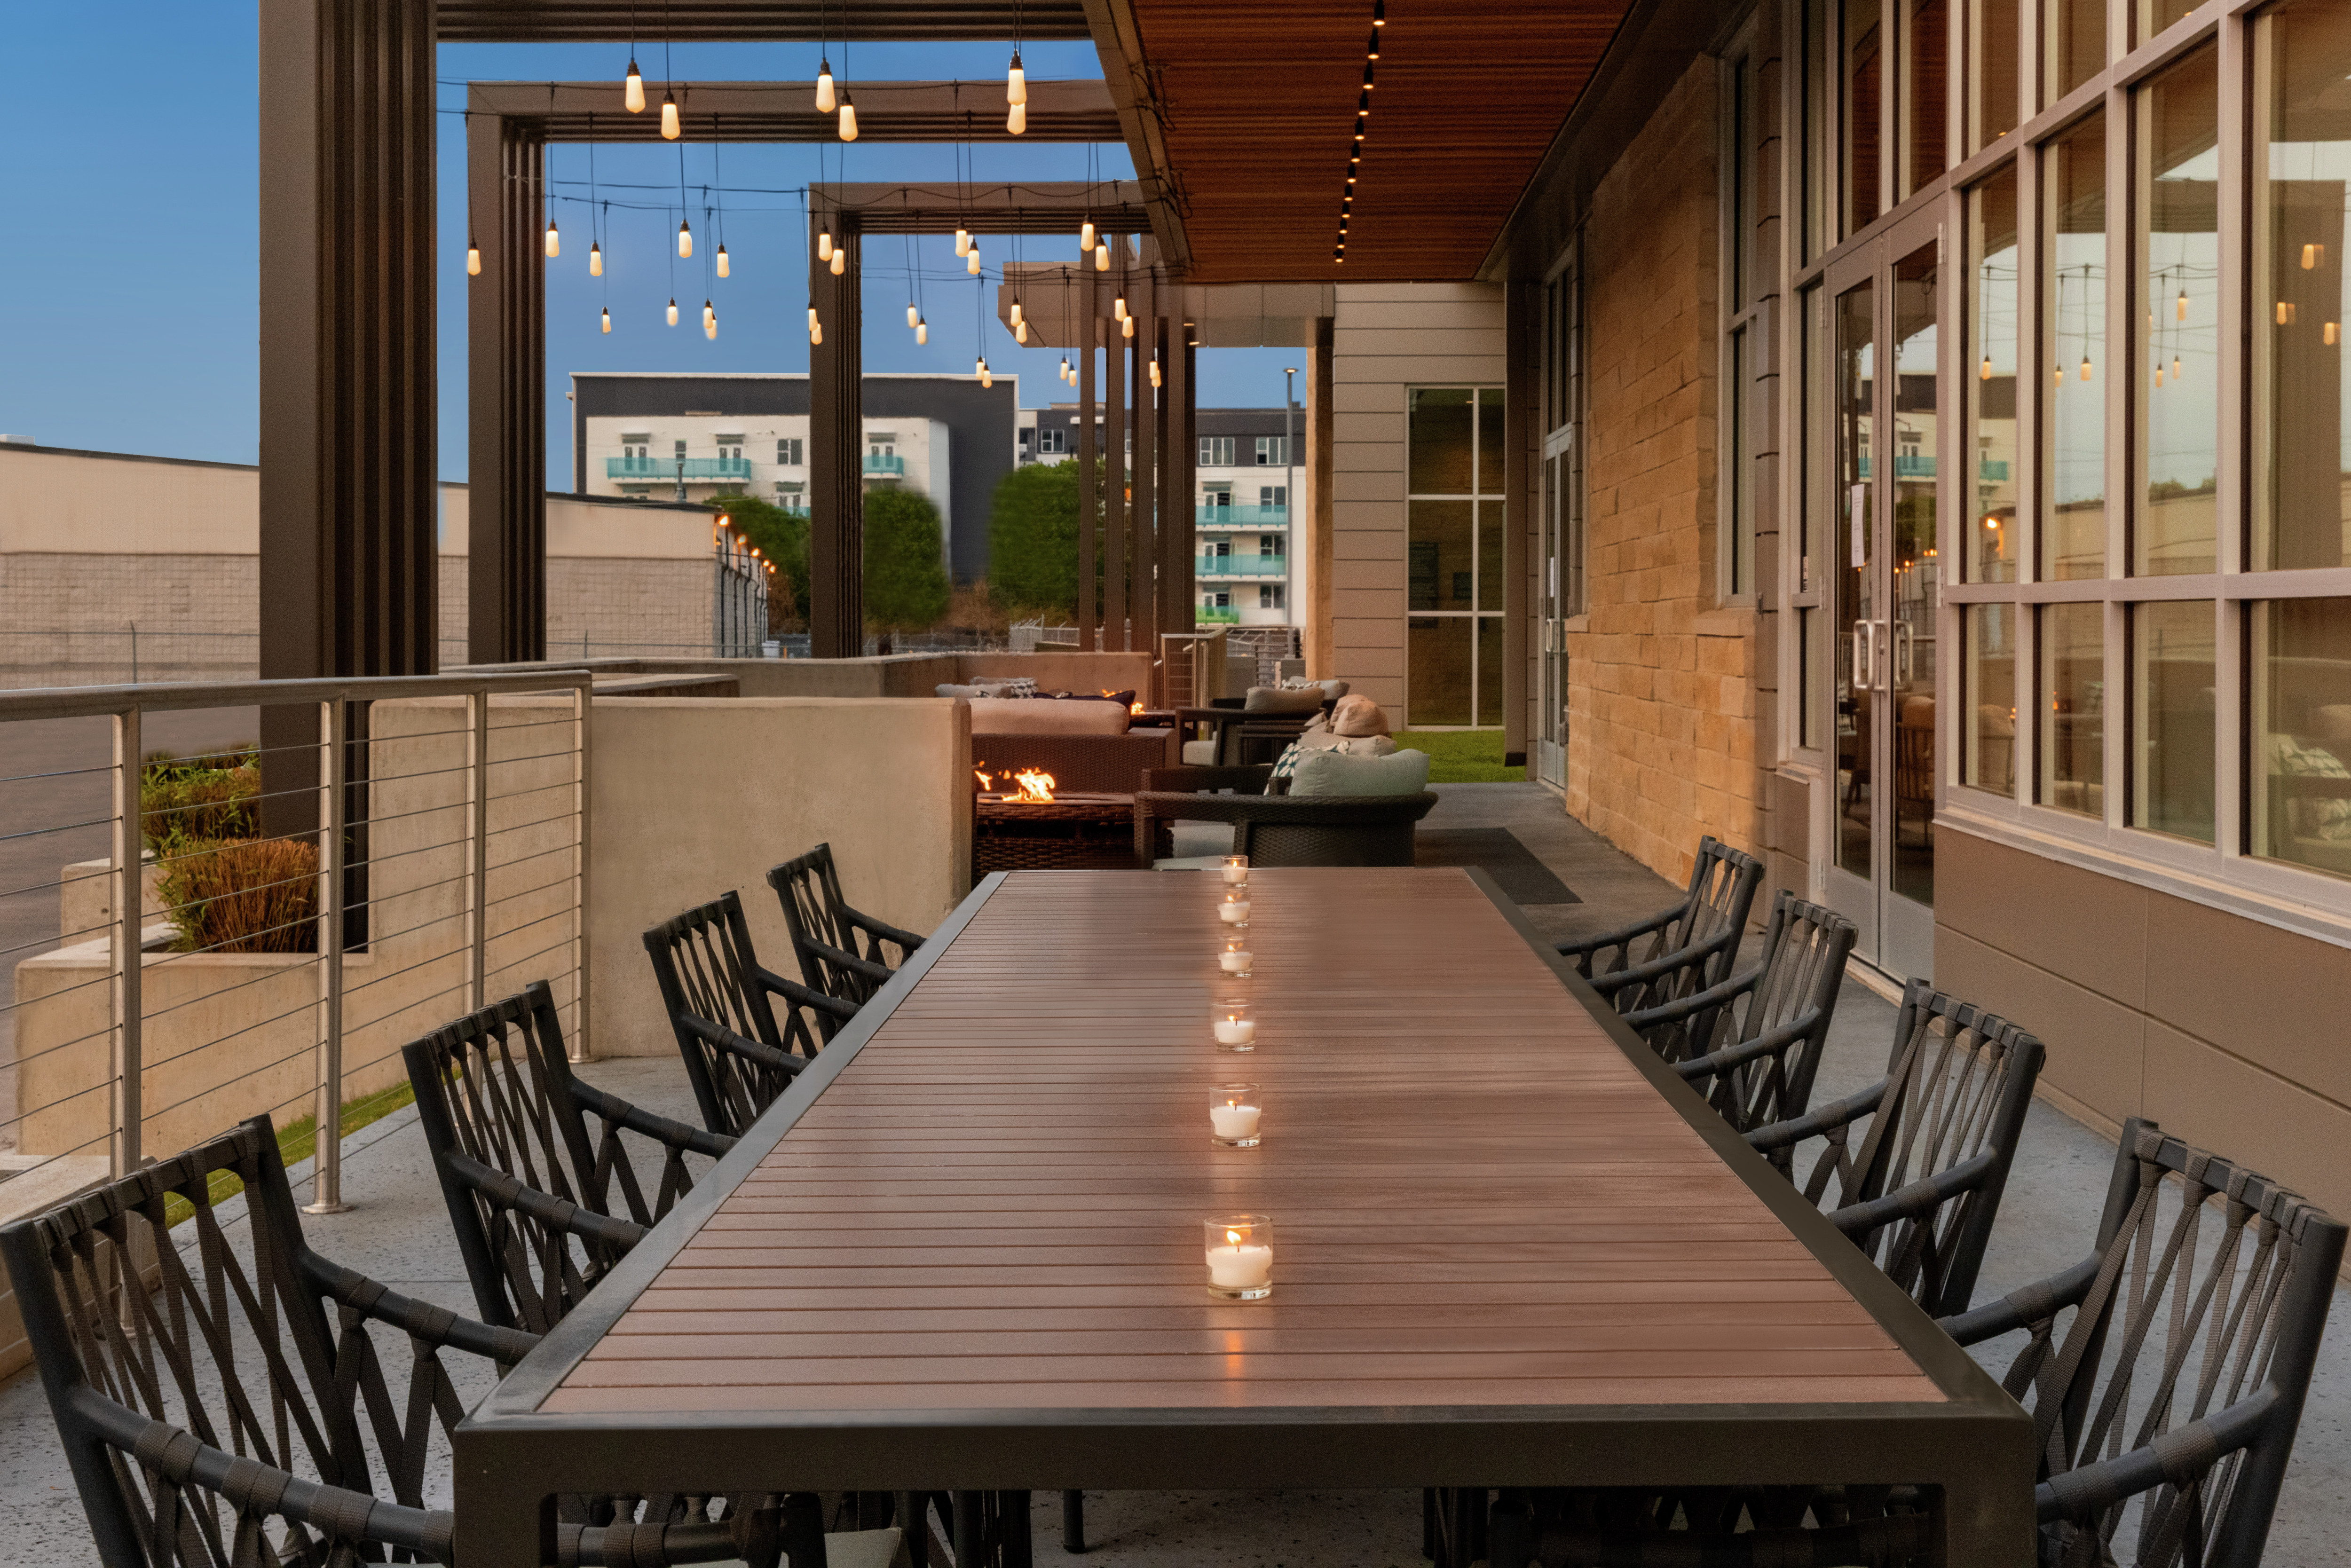 Beautiful outdoor patio area for guests to relax featuring large table set with candles.